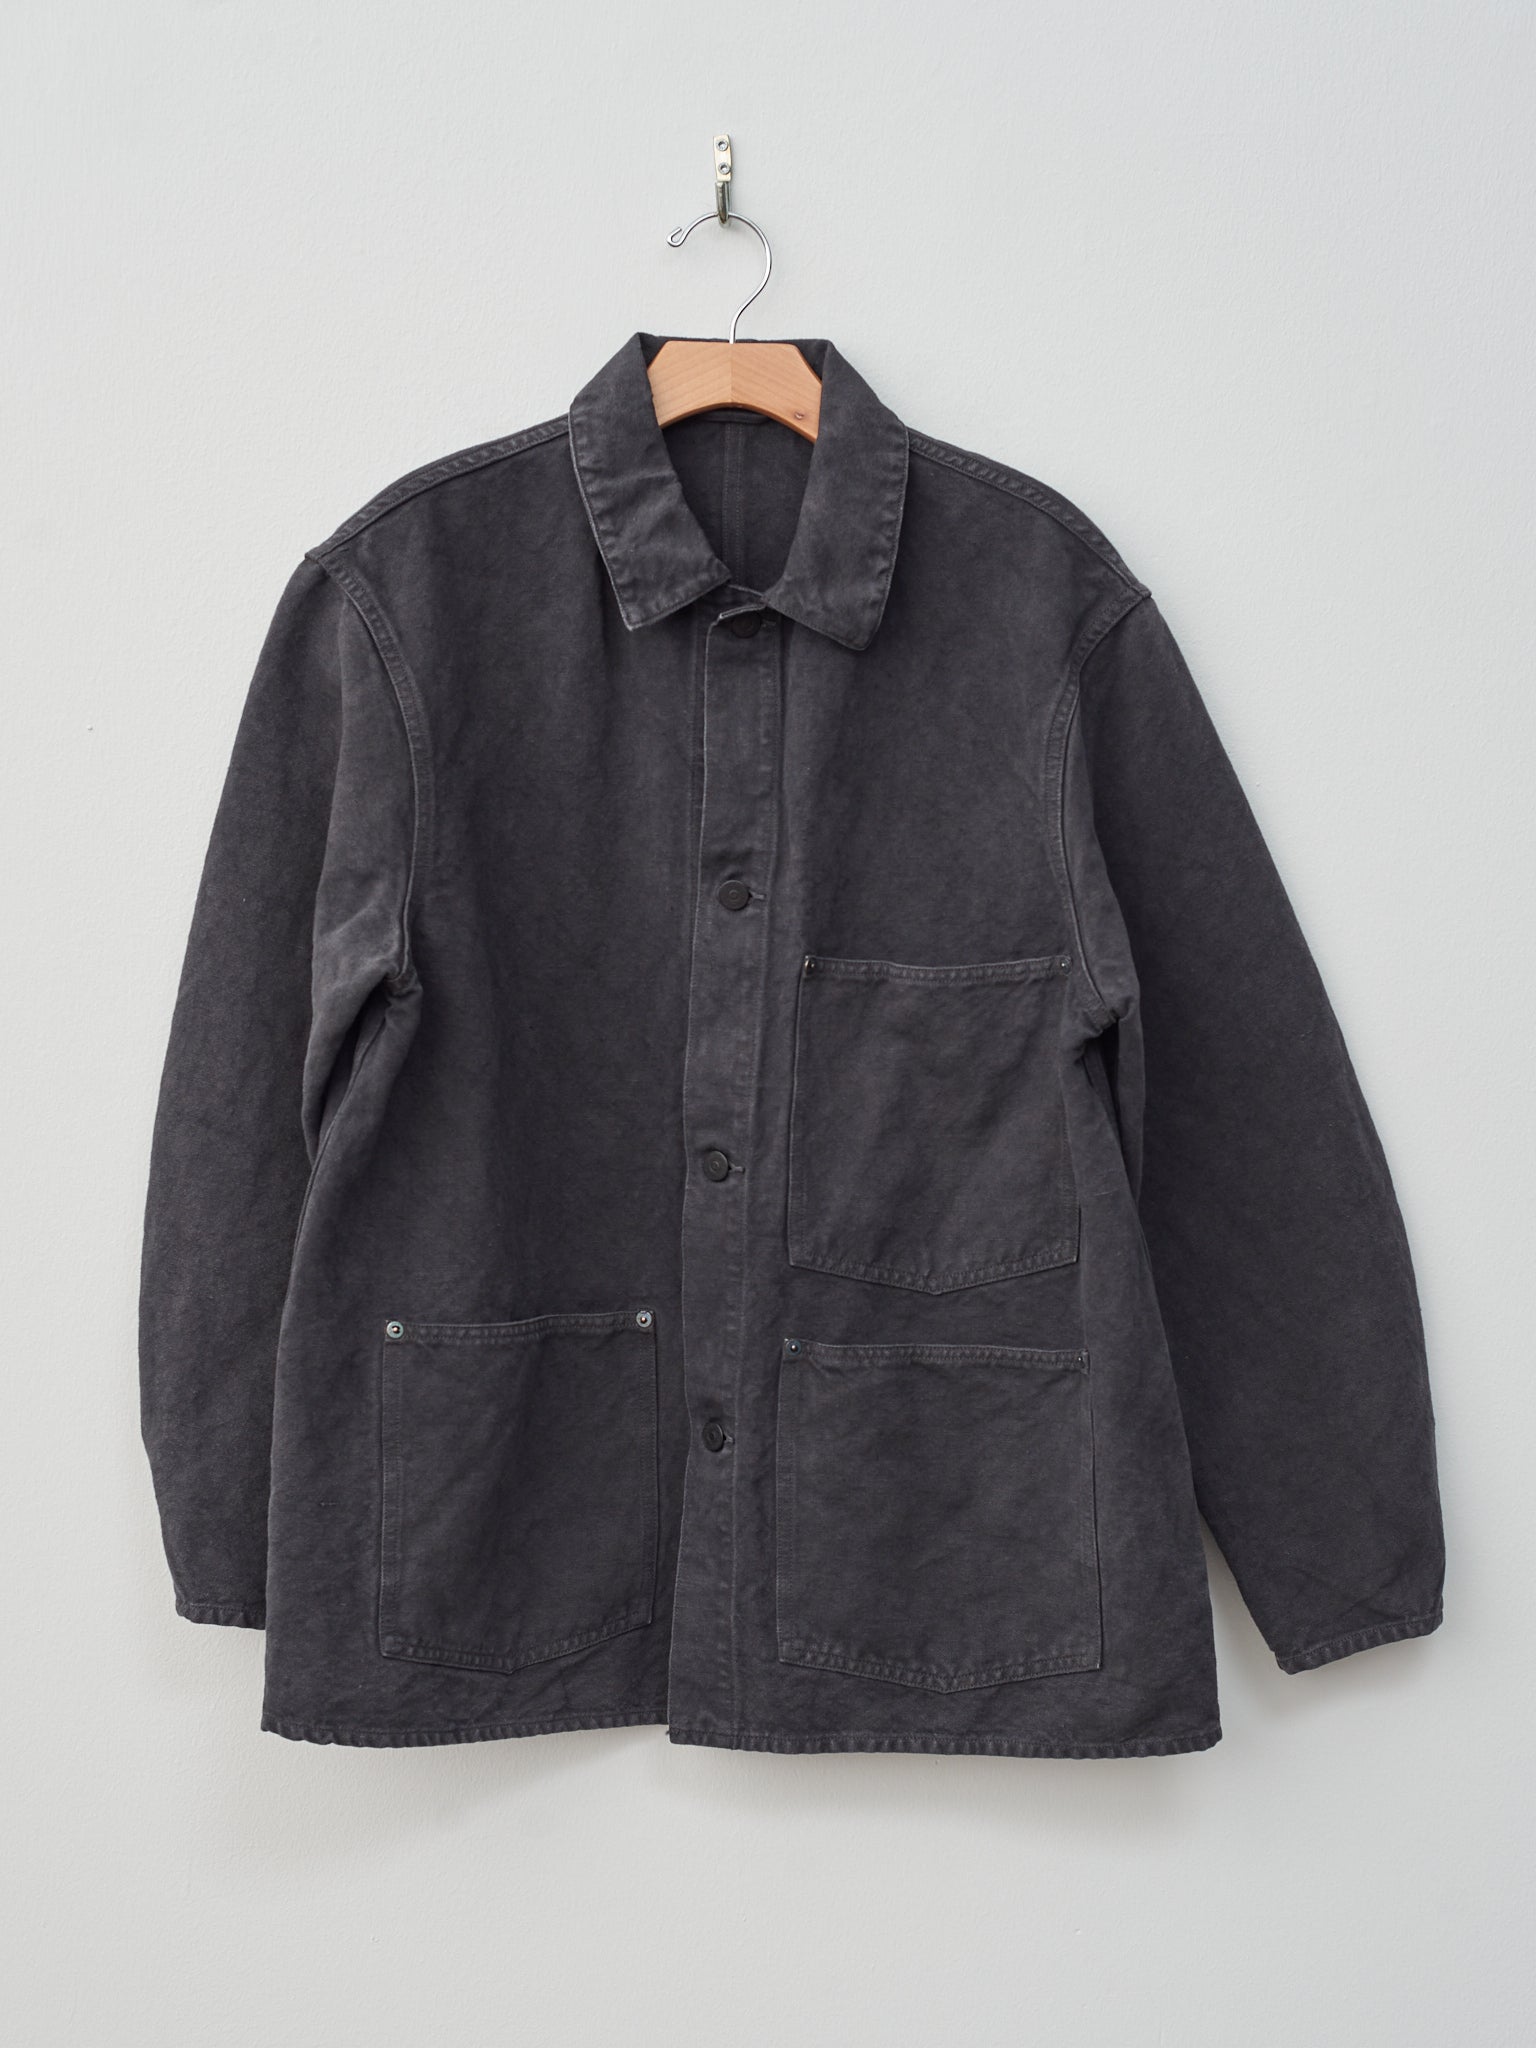 Coverall Jacket - Ink Black